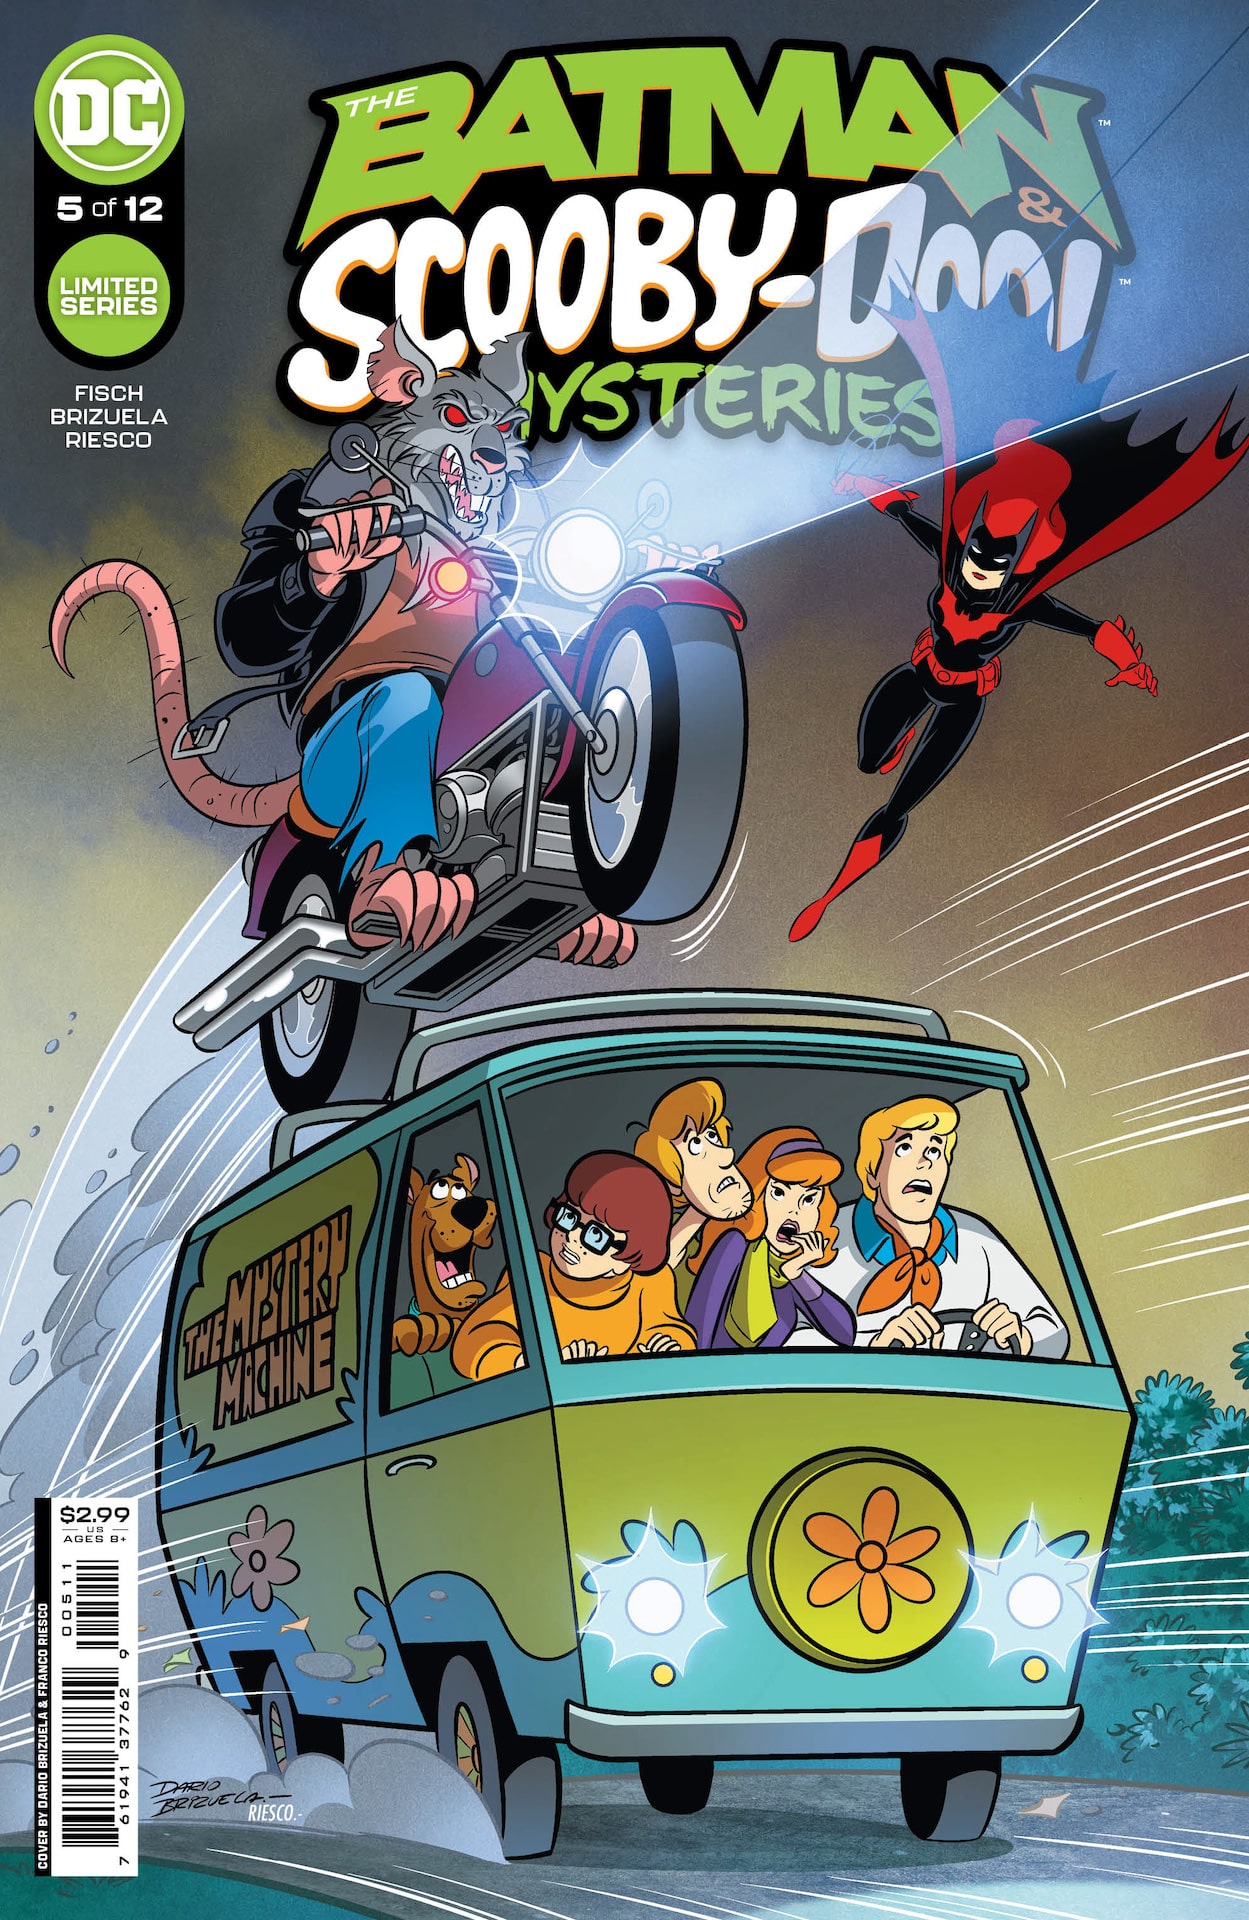 DC Preview: The Batman & Scooby-Doo Mysteries #5